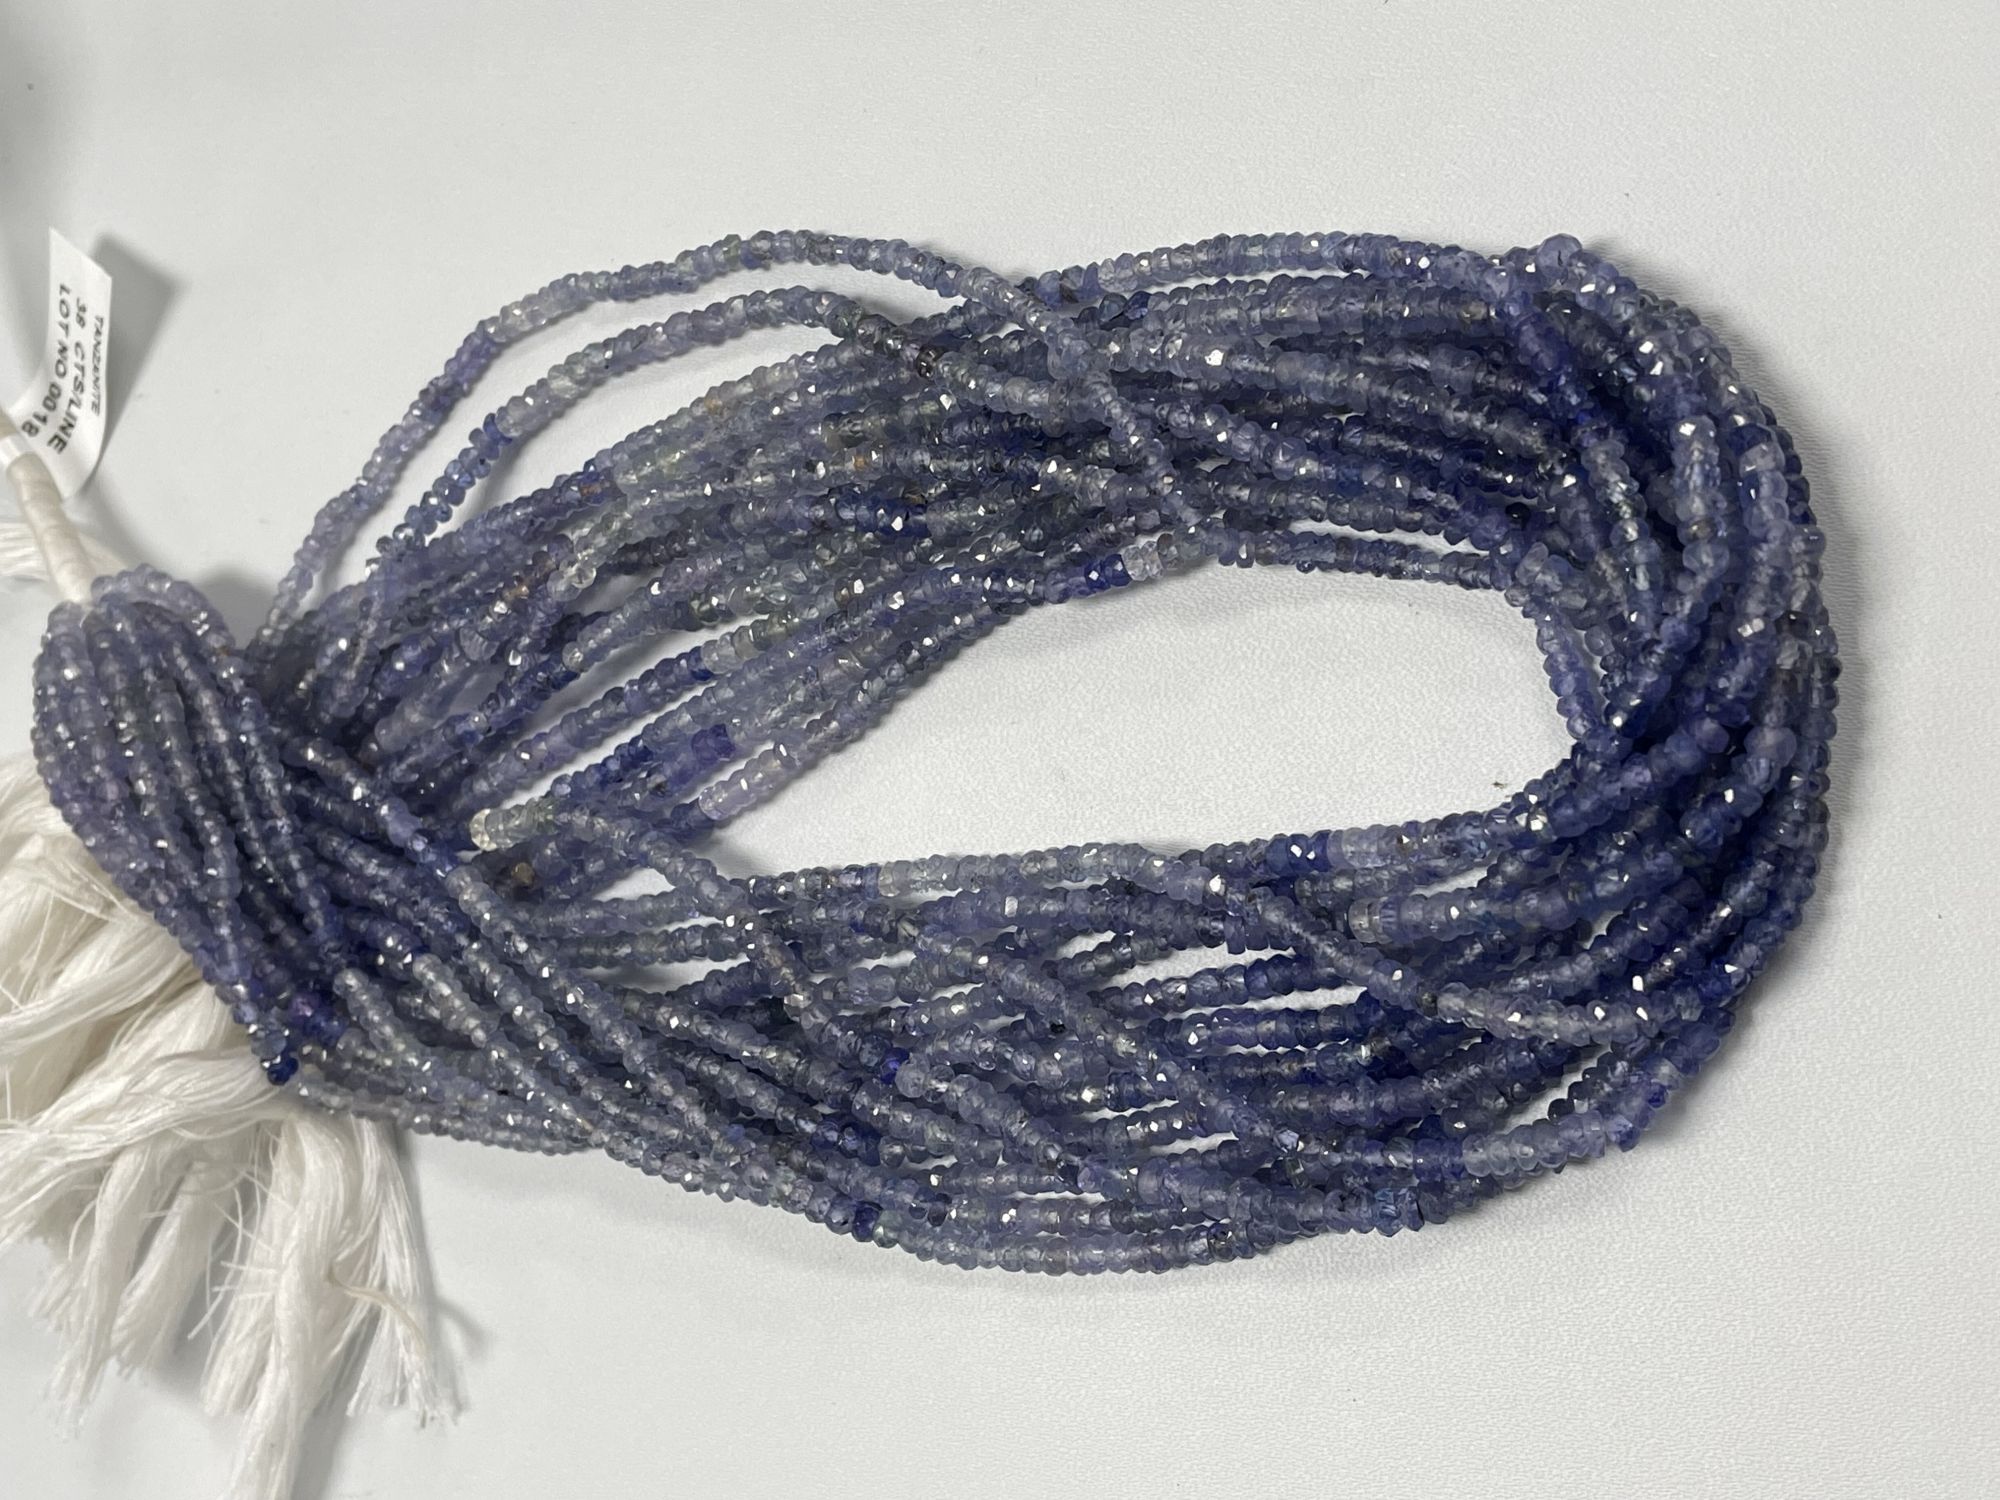 Shaded Tanzanite Rondelle Faceted